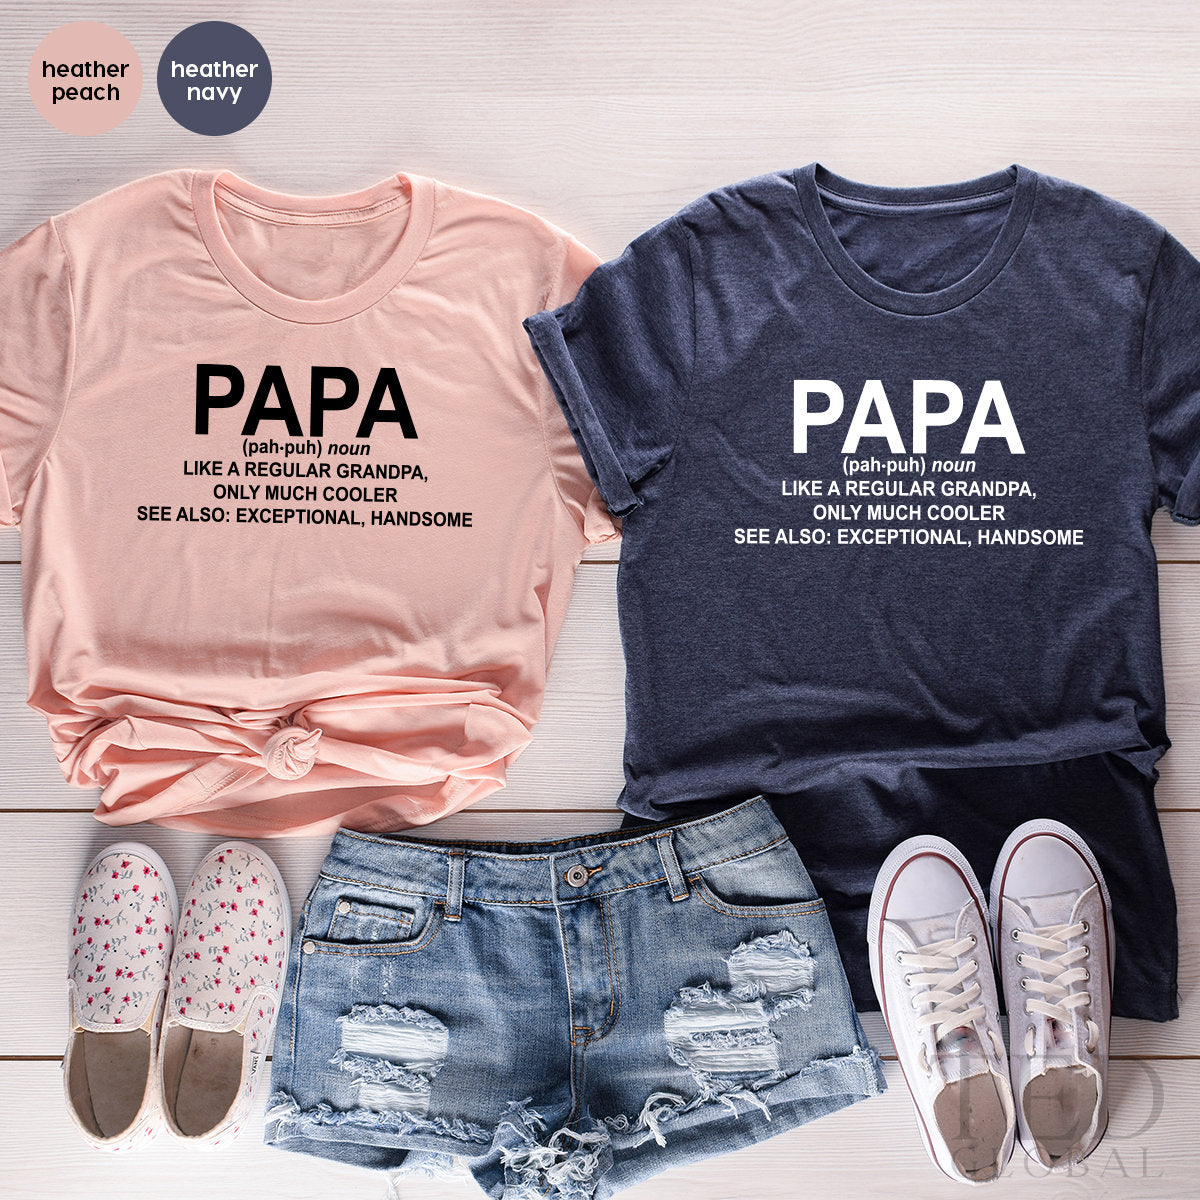 Papa T Shirt, Best Dad T-Shirt, Handsome Grandpa Tshirt, Fathers Day Gifts, ,Cool Grandfather Shirt, Papaw Gift - Fastdeliverytees.com